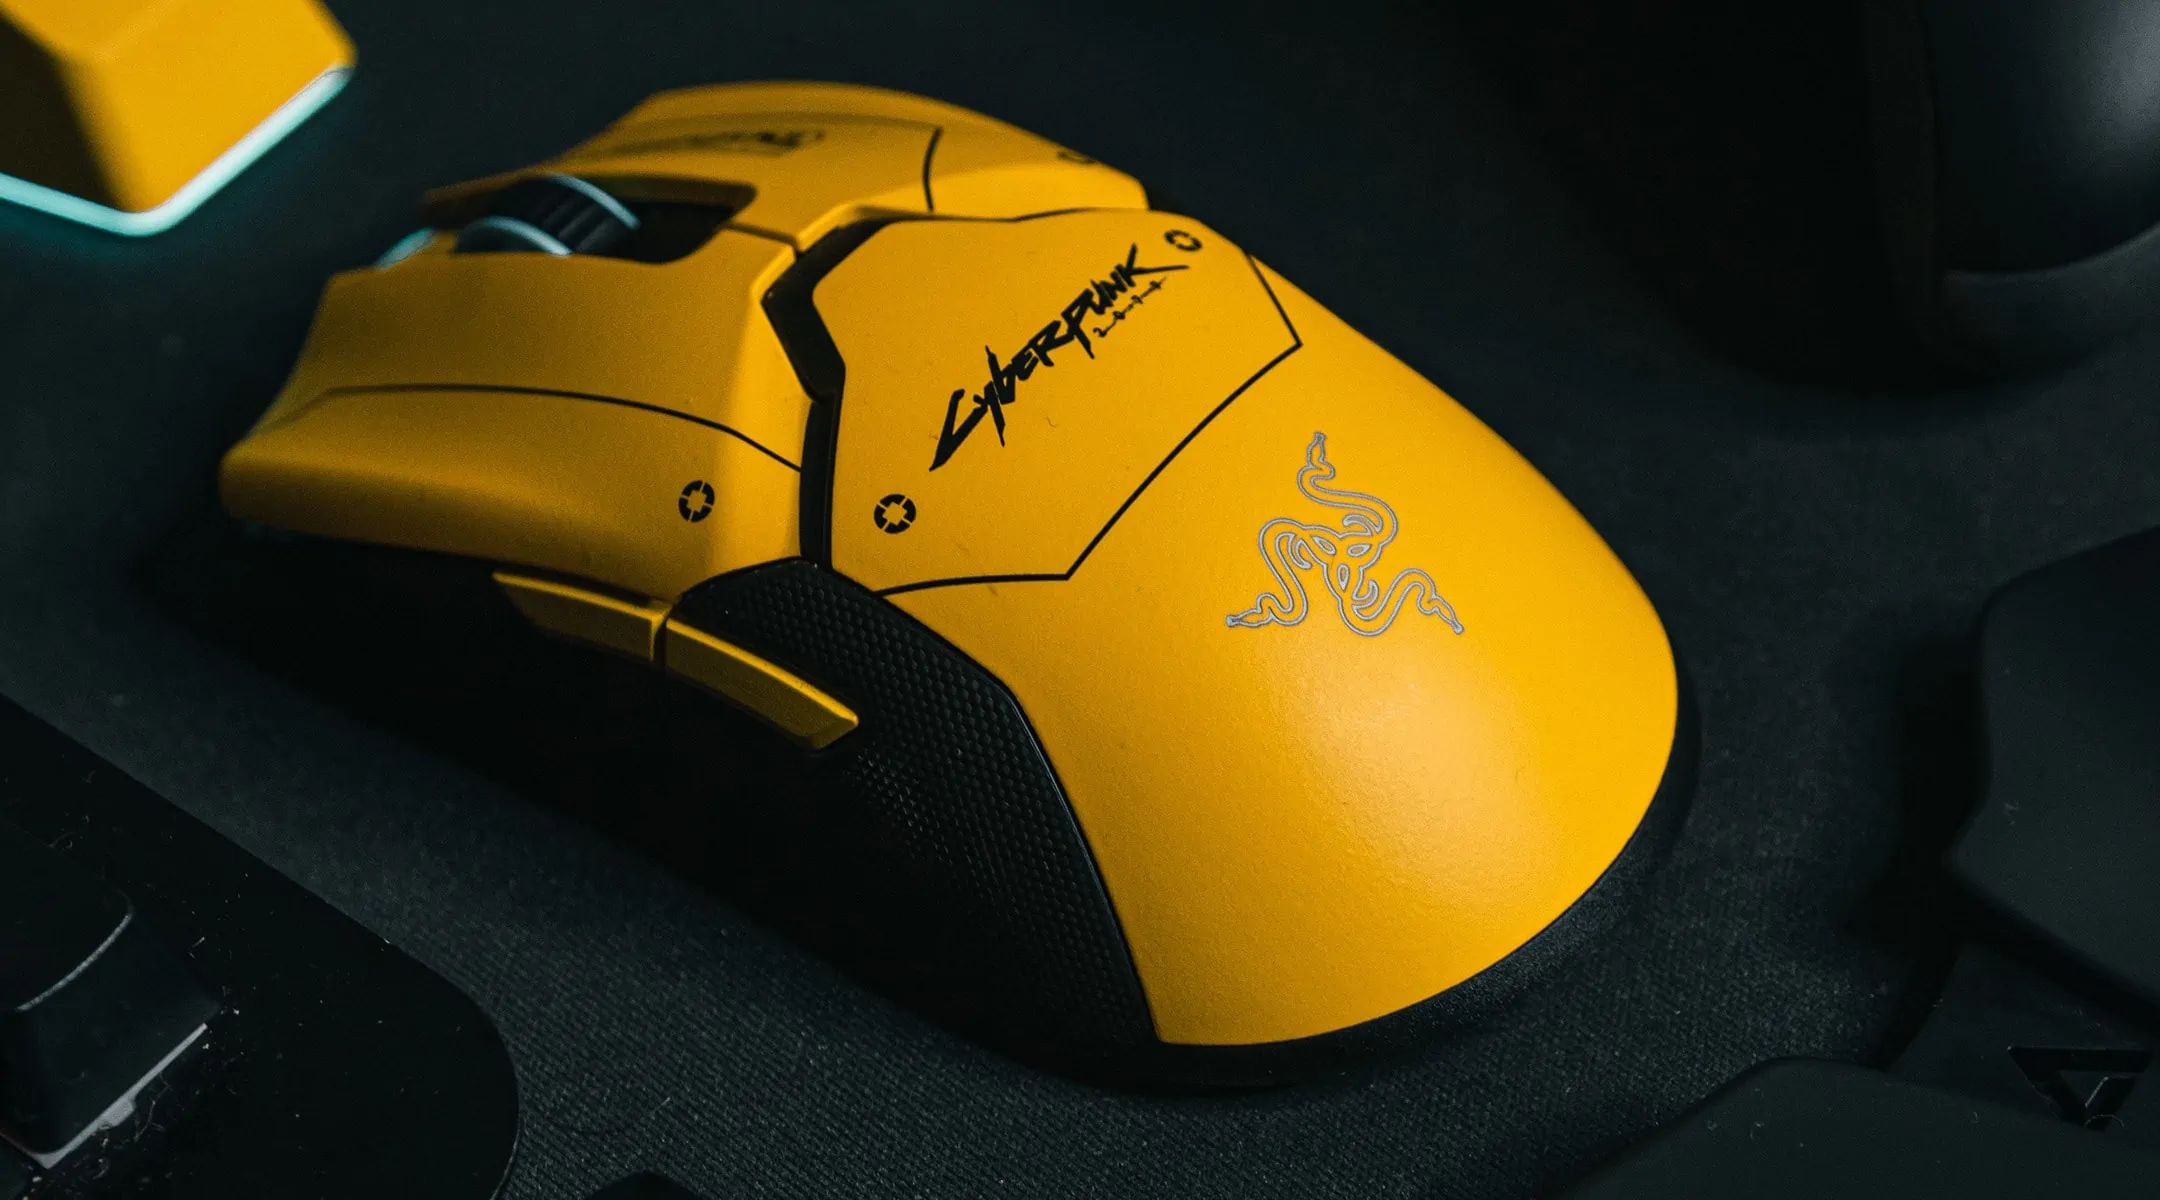 What To Look For In A PC Gaming Mouse